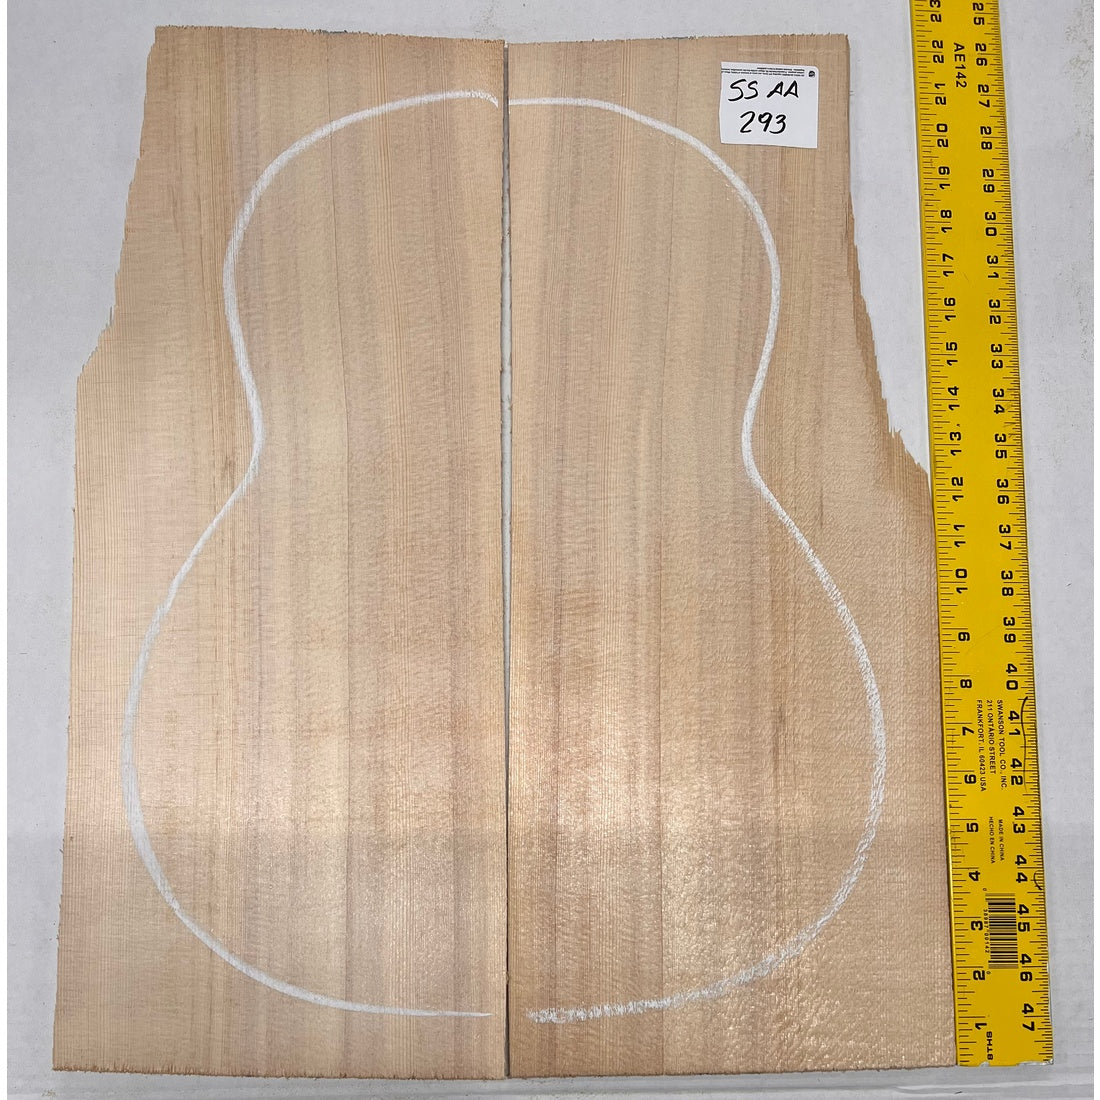 Sitka Spruce Classical Guitar Wood Tops Bookmatched SS AA 